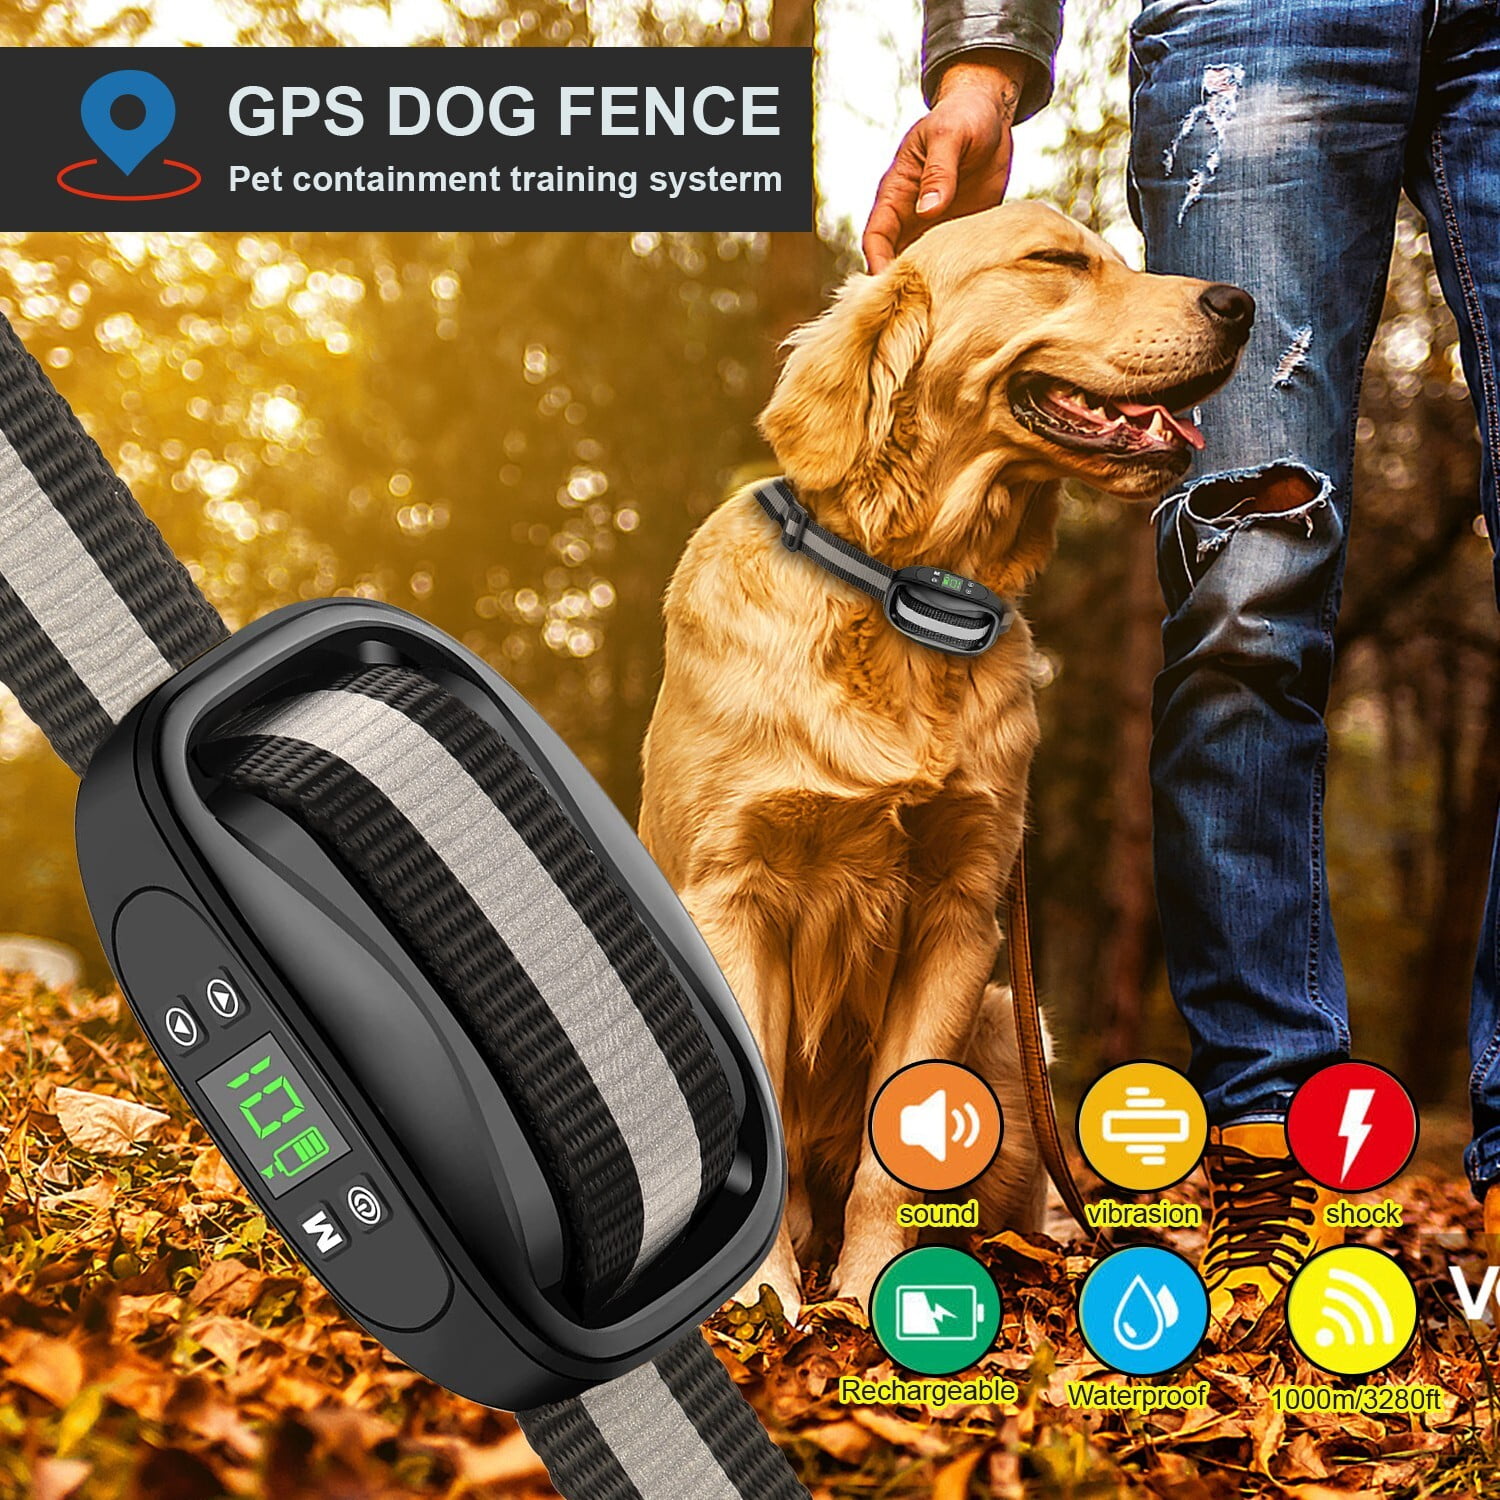 GPS Wireless Dog Fence, Pet Containment System, Training Collars Range 98-3380 ft, Adjustable Warning Strength, Rechargeable for Medium and Large Dogs - Walmart.com